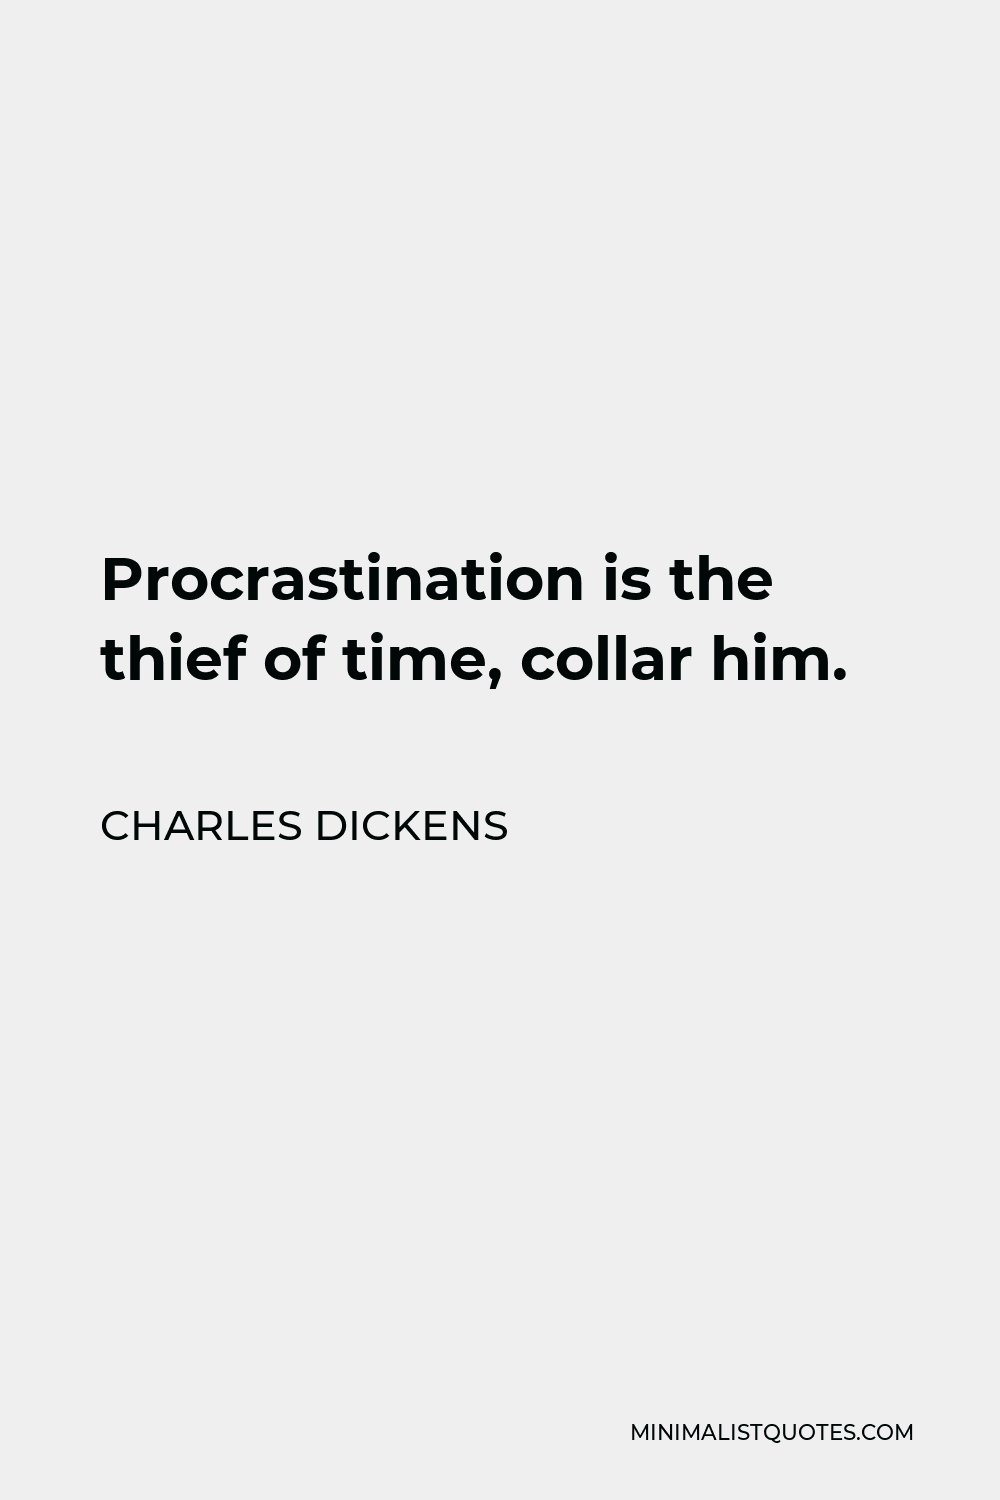 meaning of procrastination is the thief of time